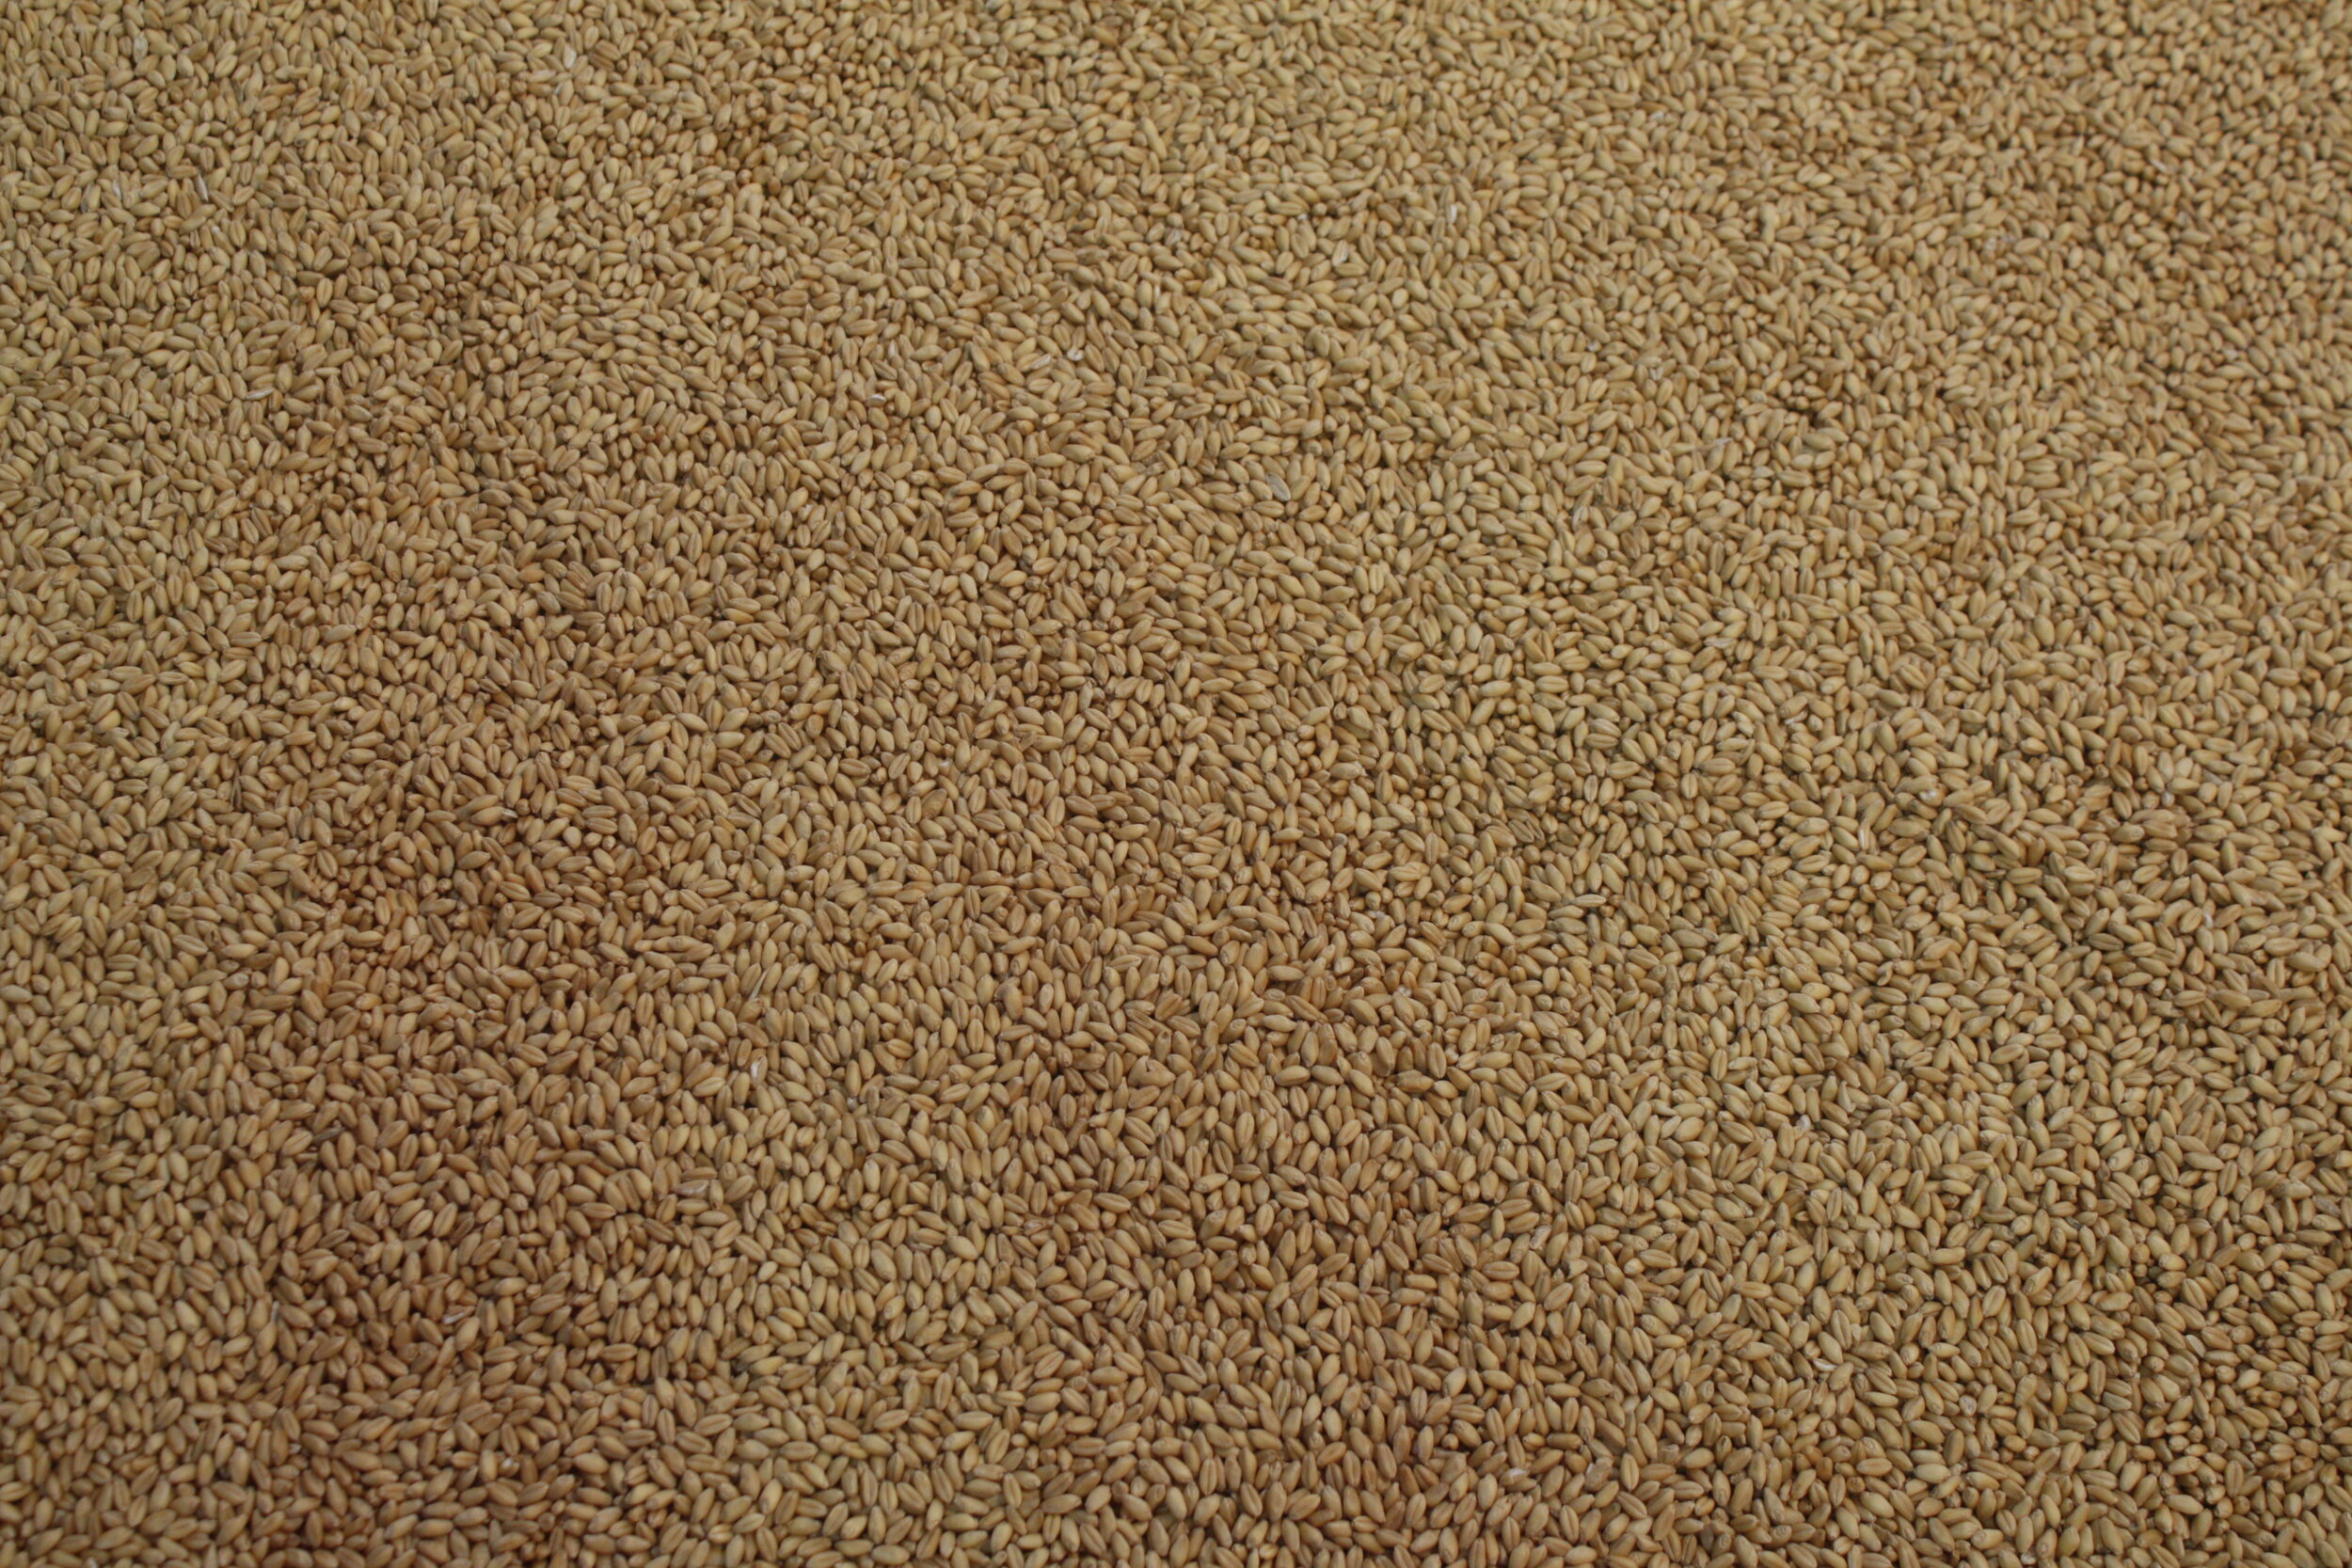    Wheat, Triticum aestivum   (detail), 2013  Material: common Wheat and table of unknown person/s. 